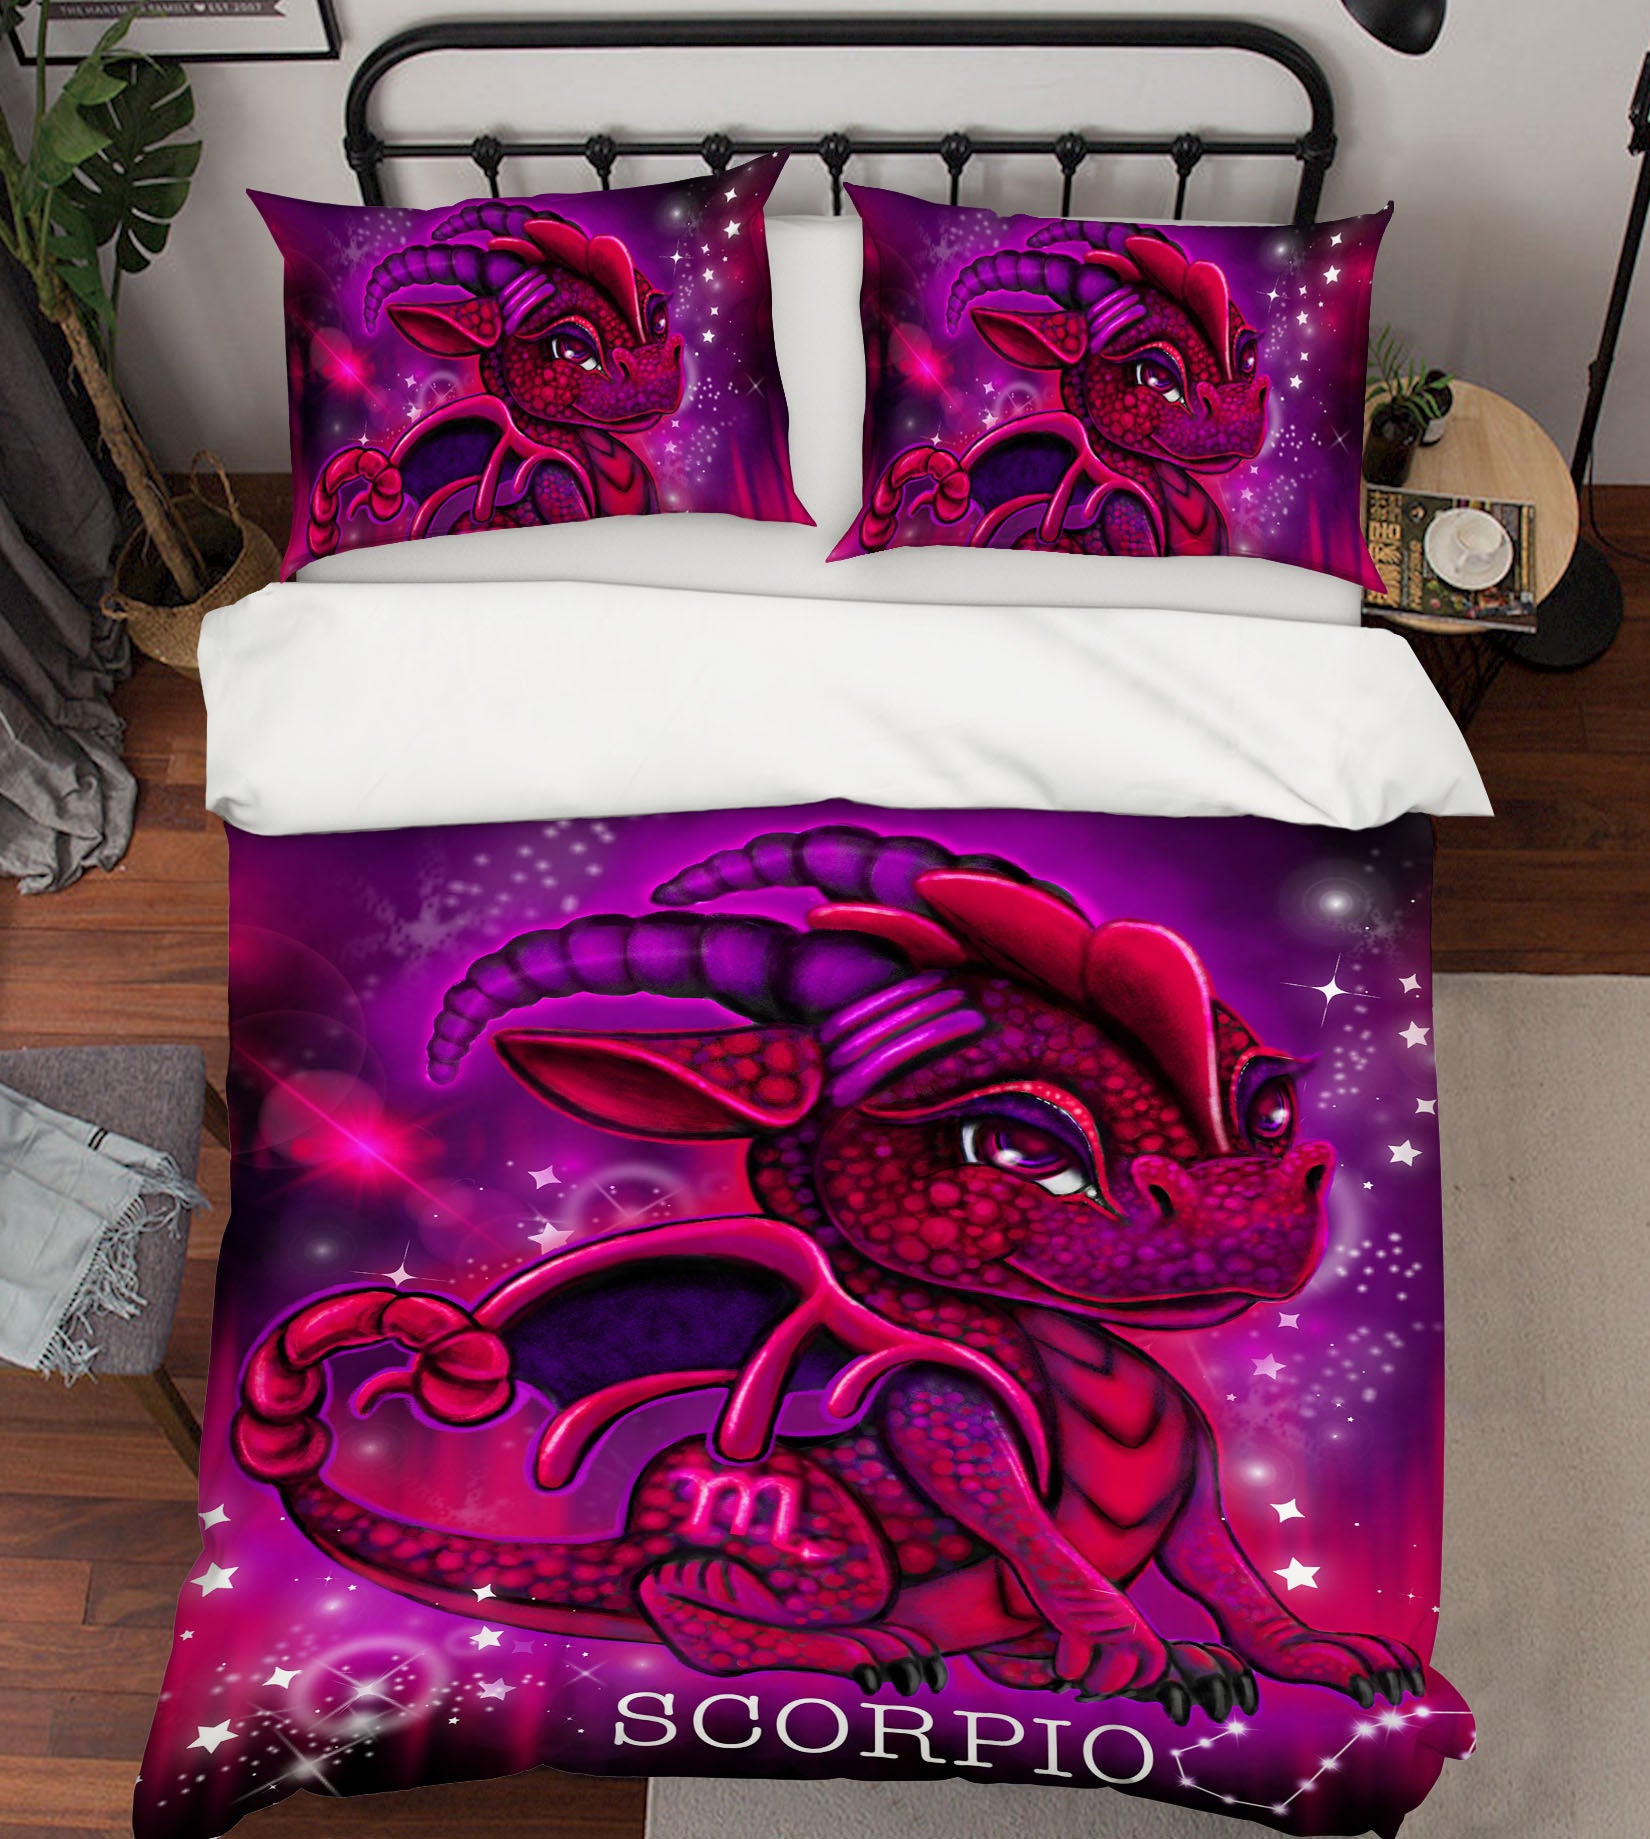 3D Red Scorpio 8605 Sheena Pike Bedding Bed Pillowcases Quilt Cover Duvet Cover